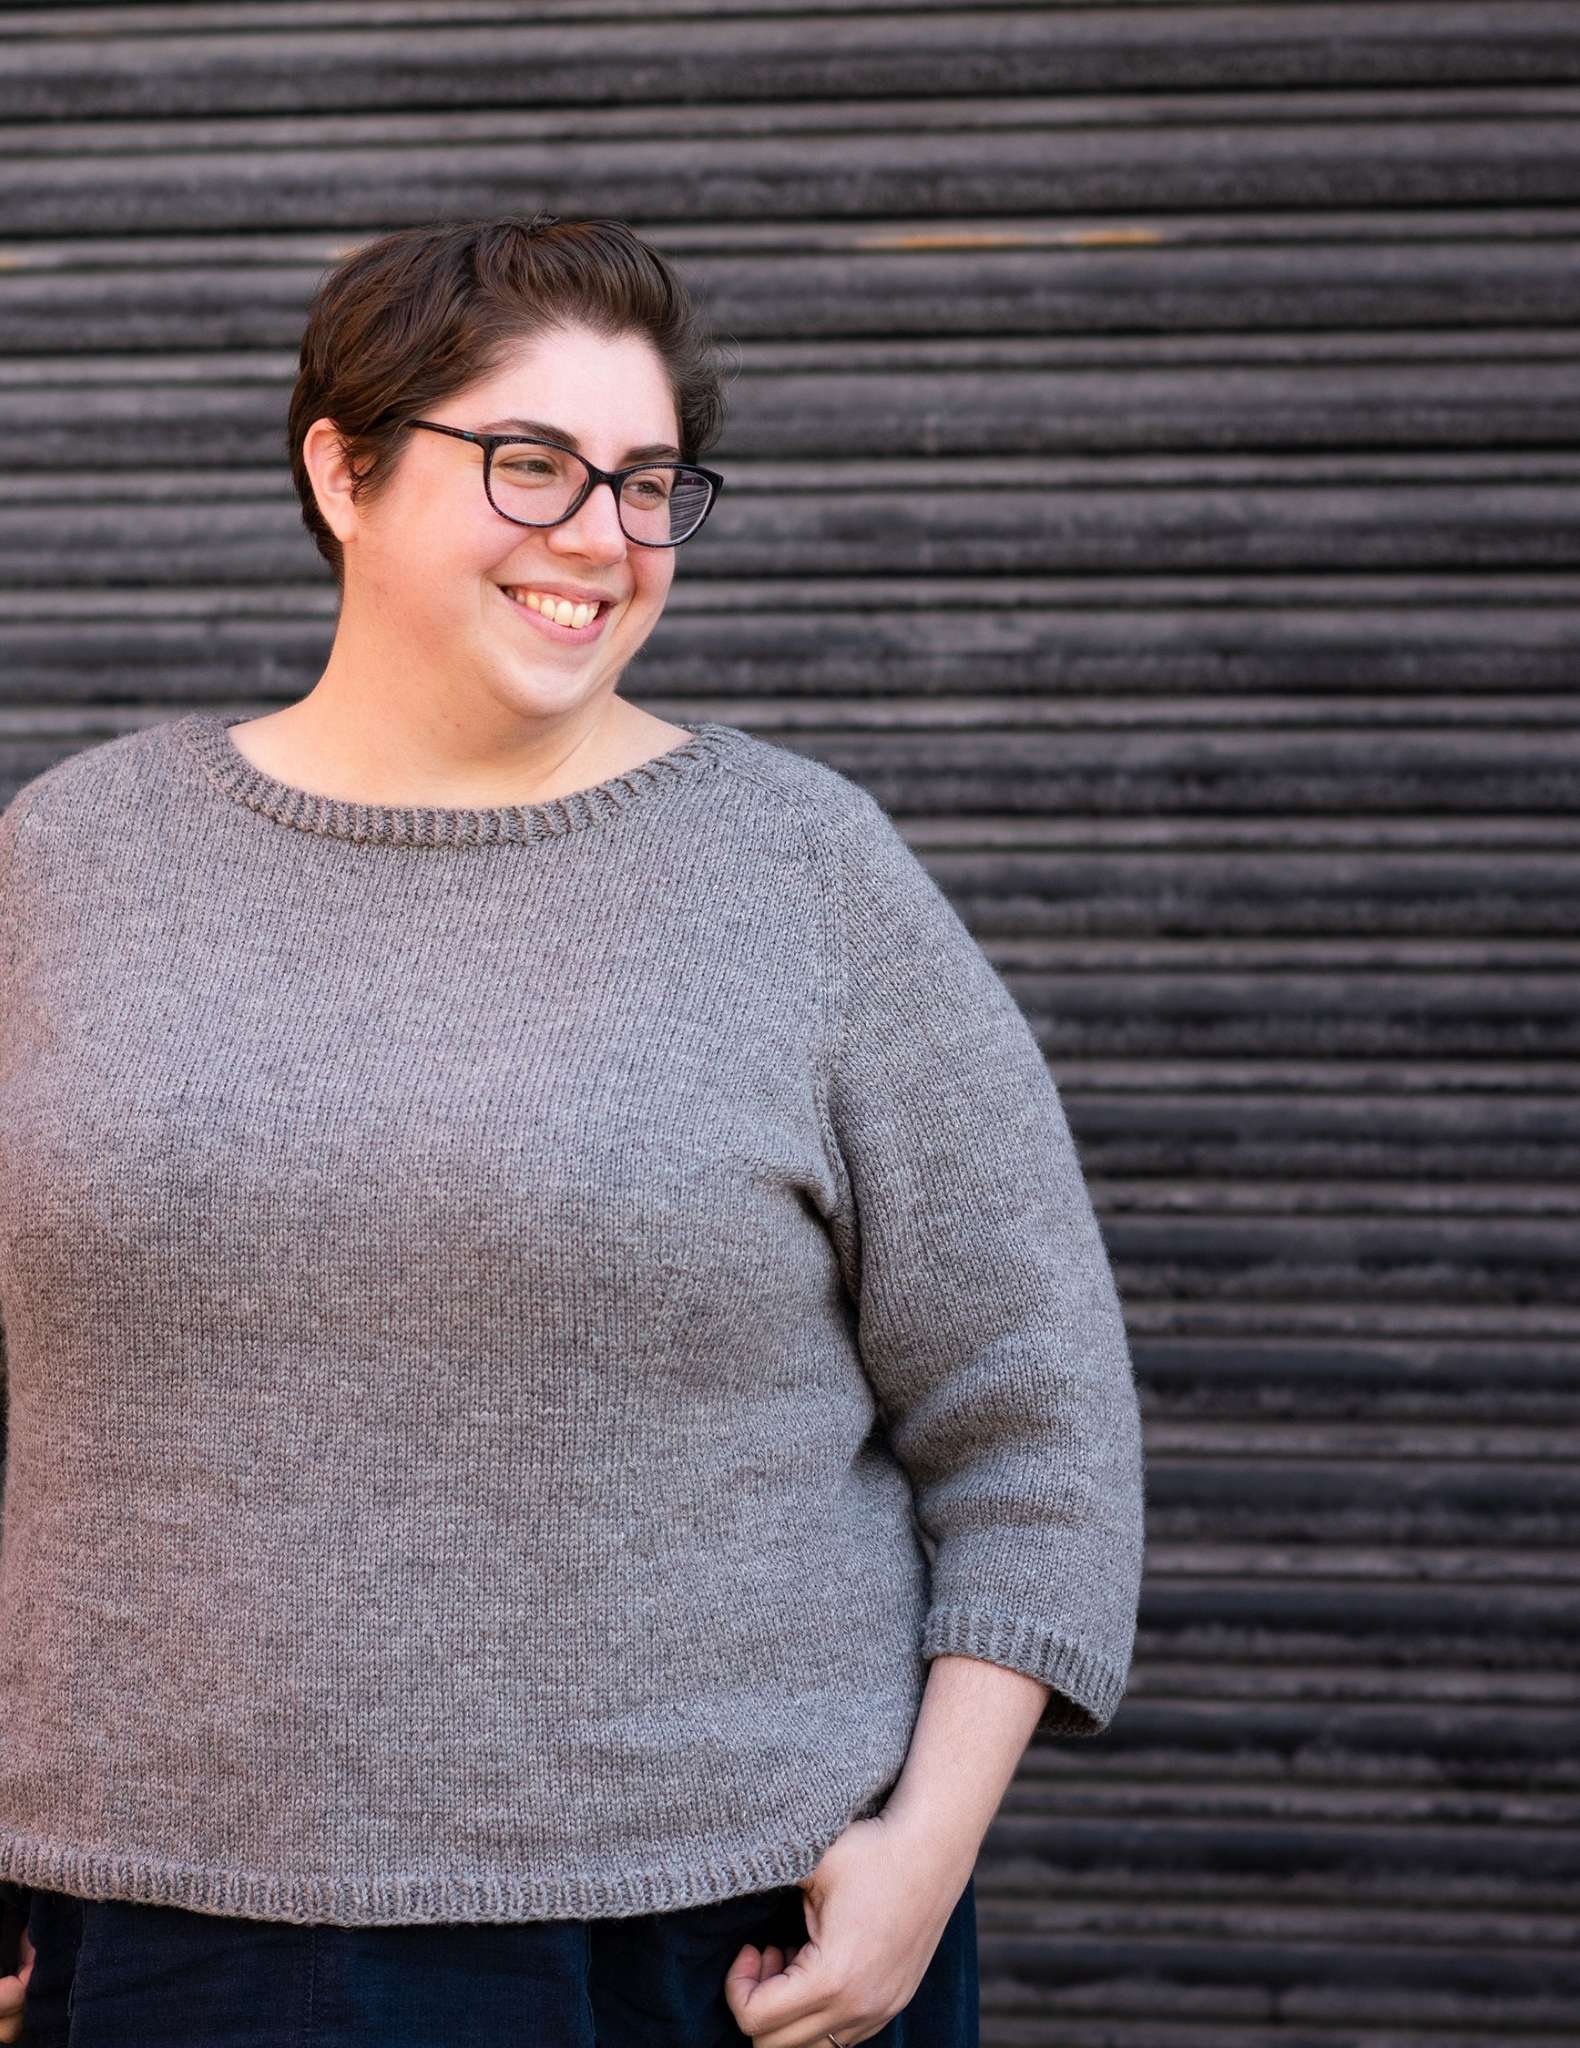 A white plus-size woman with dark hair and glasses wears a grey sweater, she is smiling and looking to the side with one hand resting on the top of a pocket